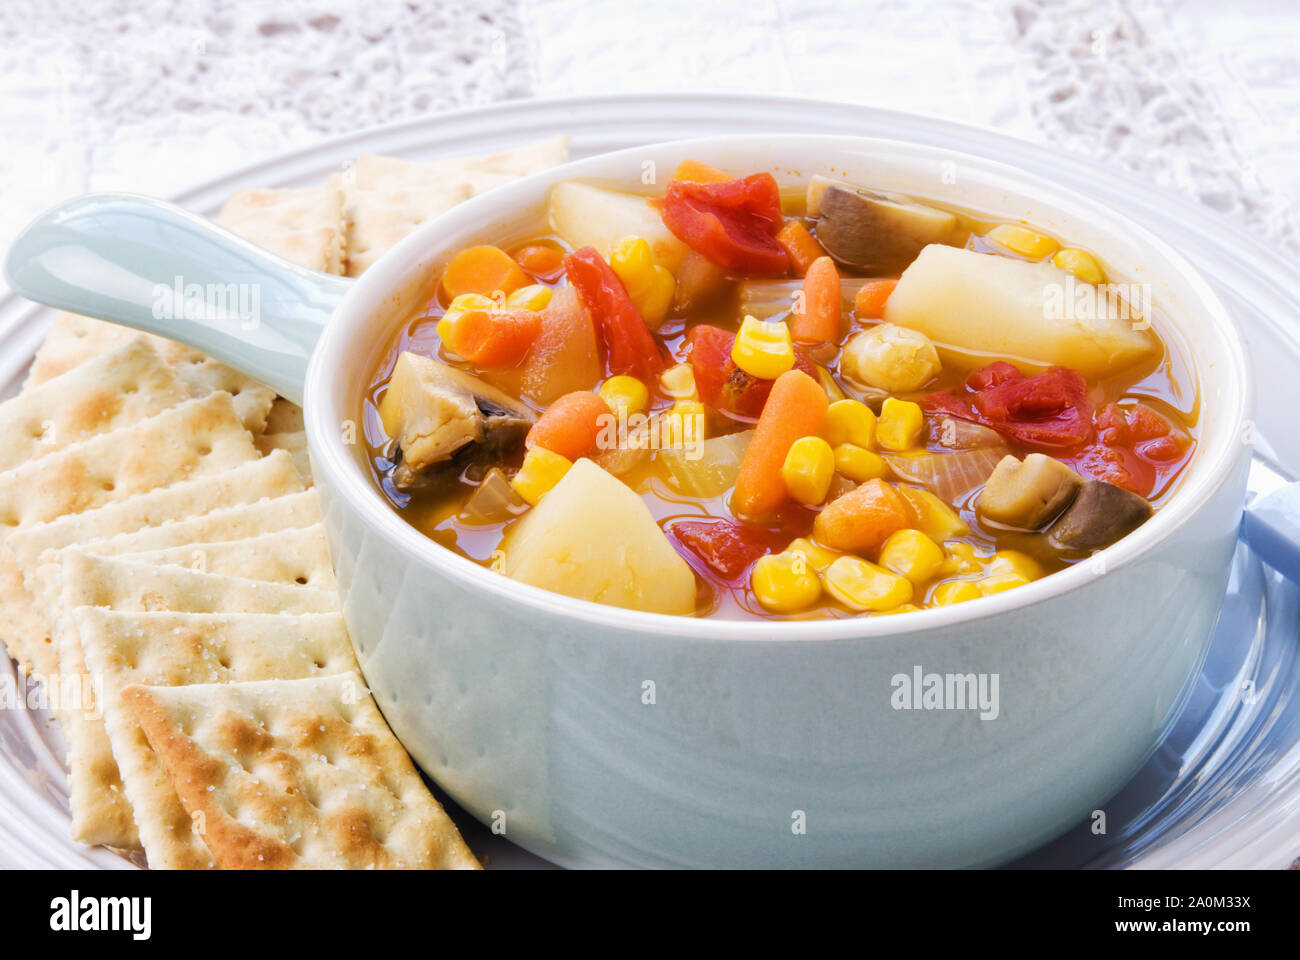 Warm homemade vegetable soup and served with crispy saltine crackers in a light blue colored bowl on a white plate. Stock Photo